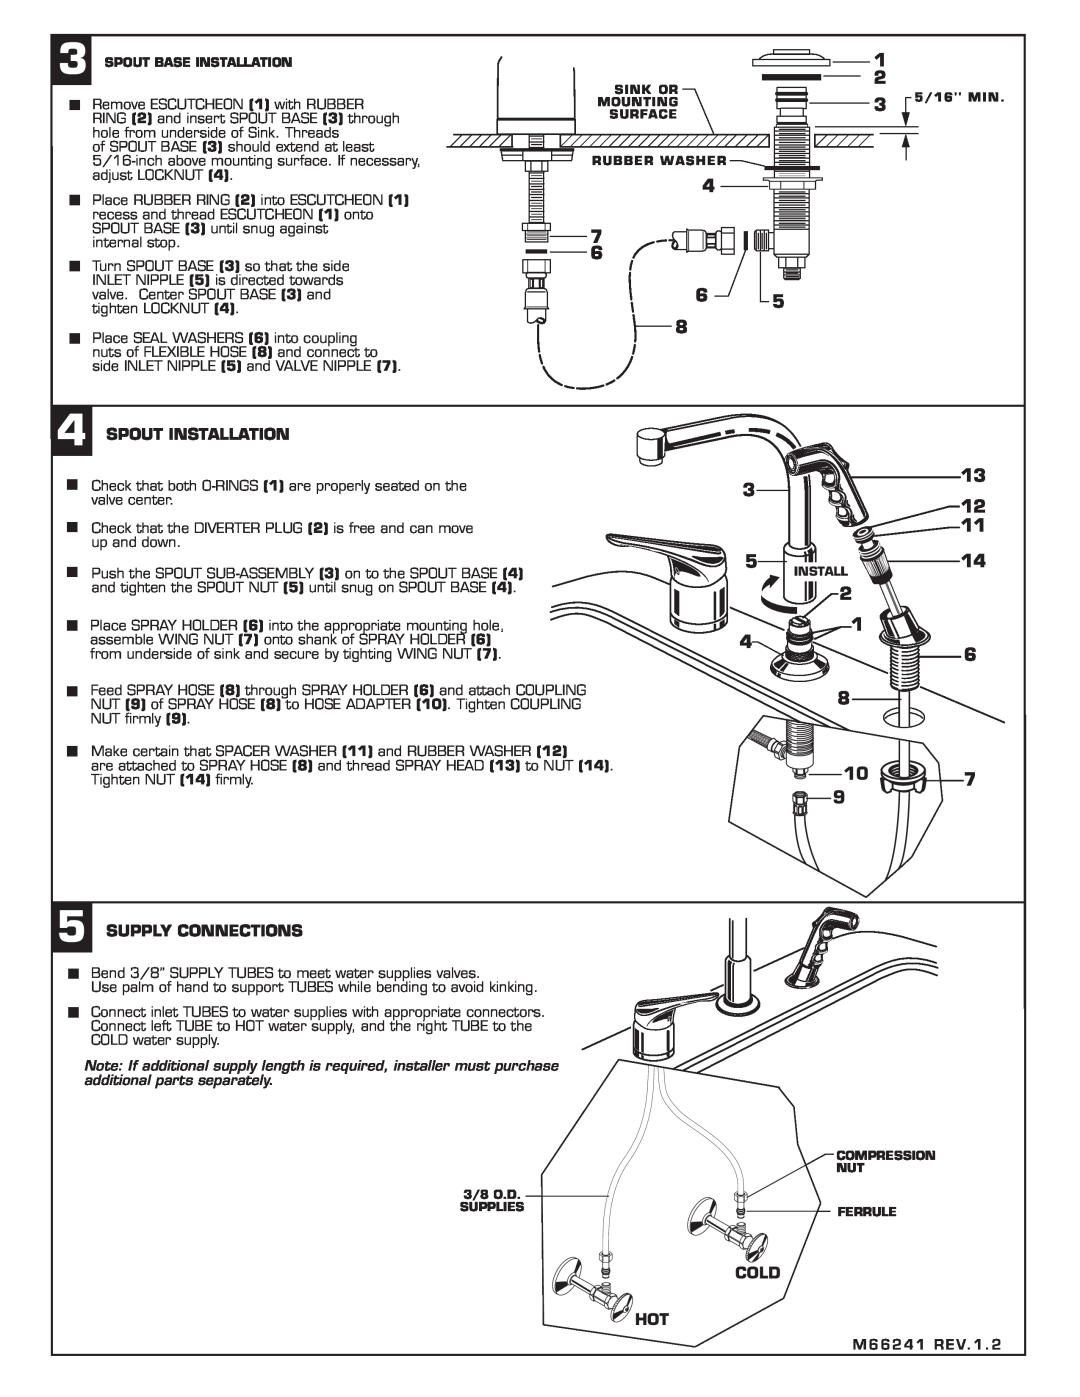 American Standard 2021.831 installation instructions 2 1 6, 4SPOUT INSTALLATION, 5SUPPLY CONNECTIONS, Cold Hot 